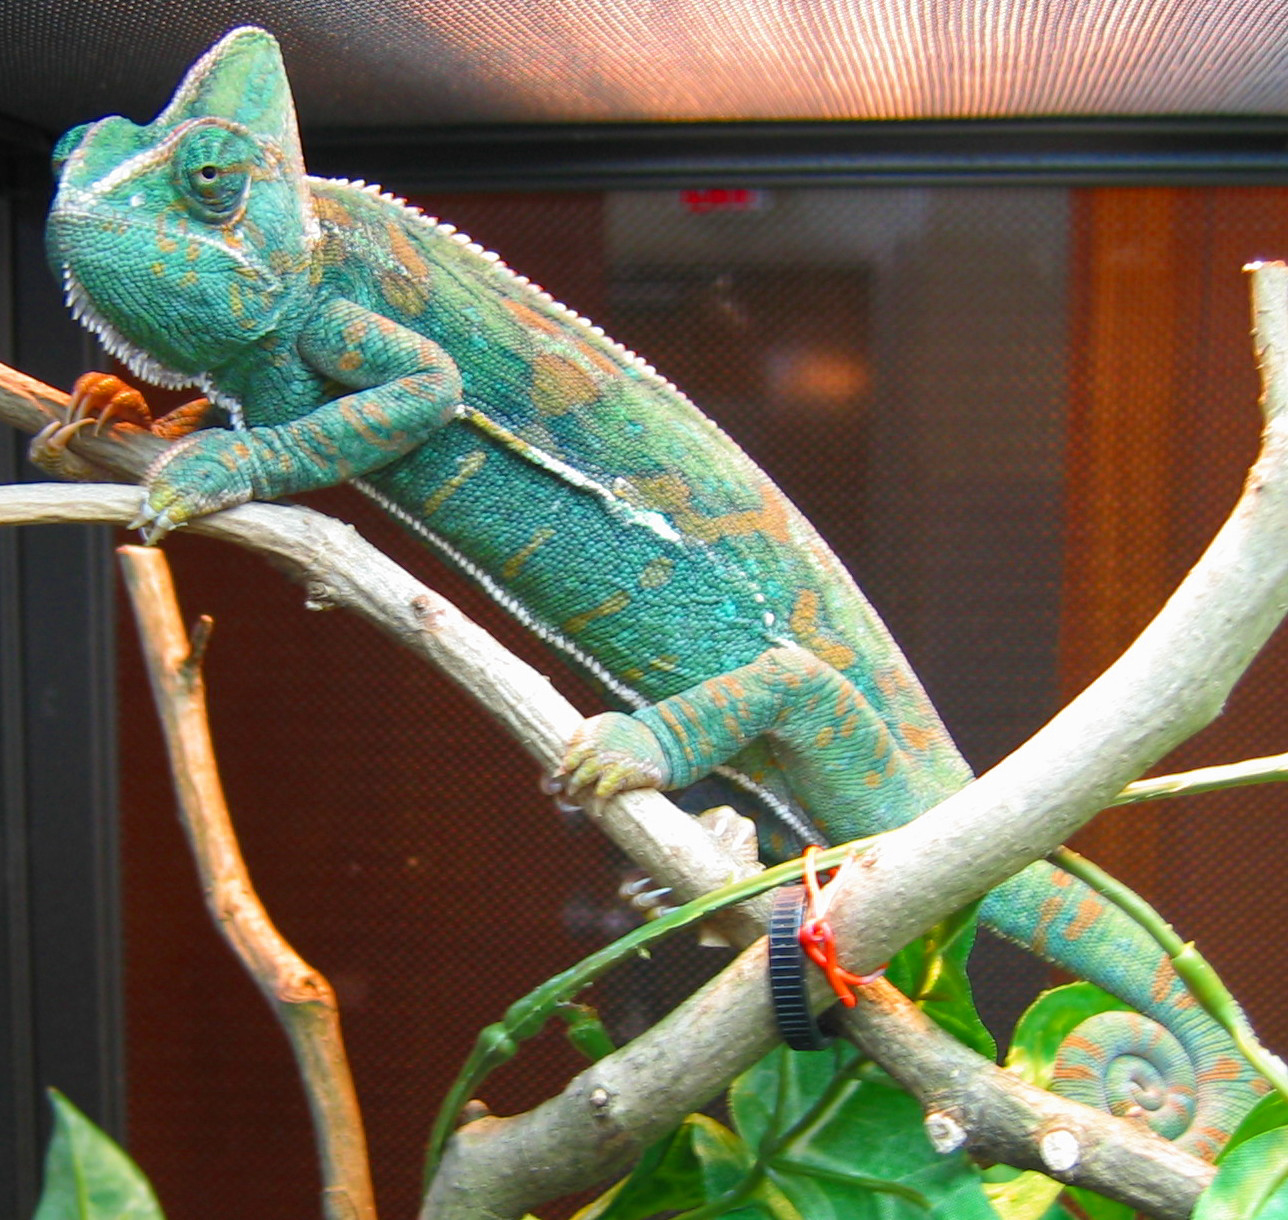 Animal Galleries Pictures Of Animals From Around The World Reptiles Lizards Chameleon Chamaeleonidae Lizard Photo Chameleon Cameleon Calyptratus Female Green Chameleon Lizard Chamaeleonidae Terrarium House Pet,Grandma In Irish Slang